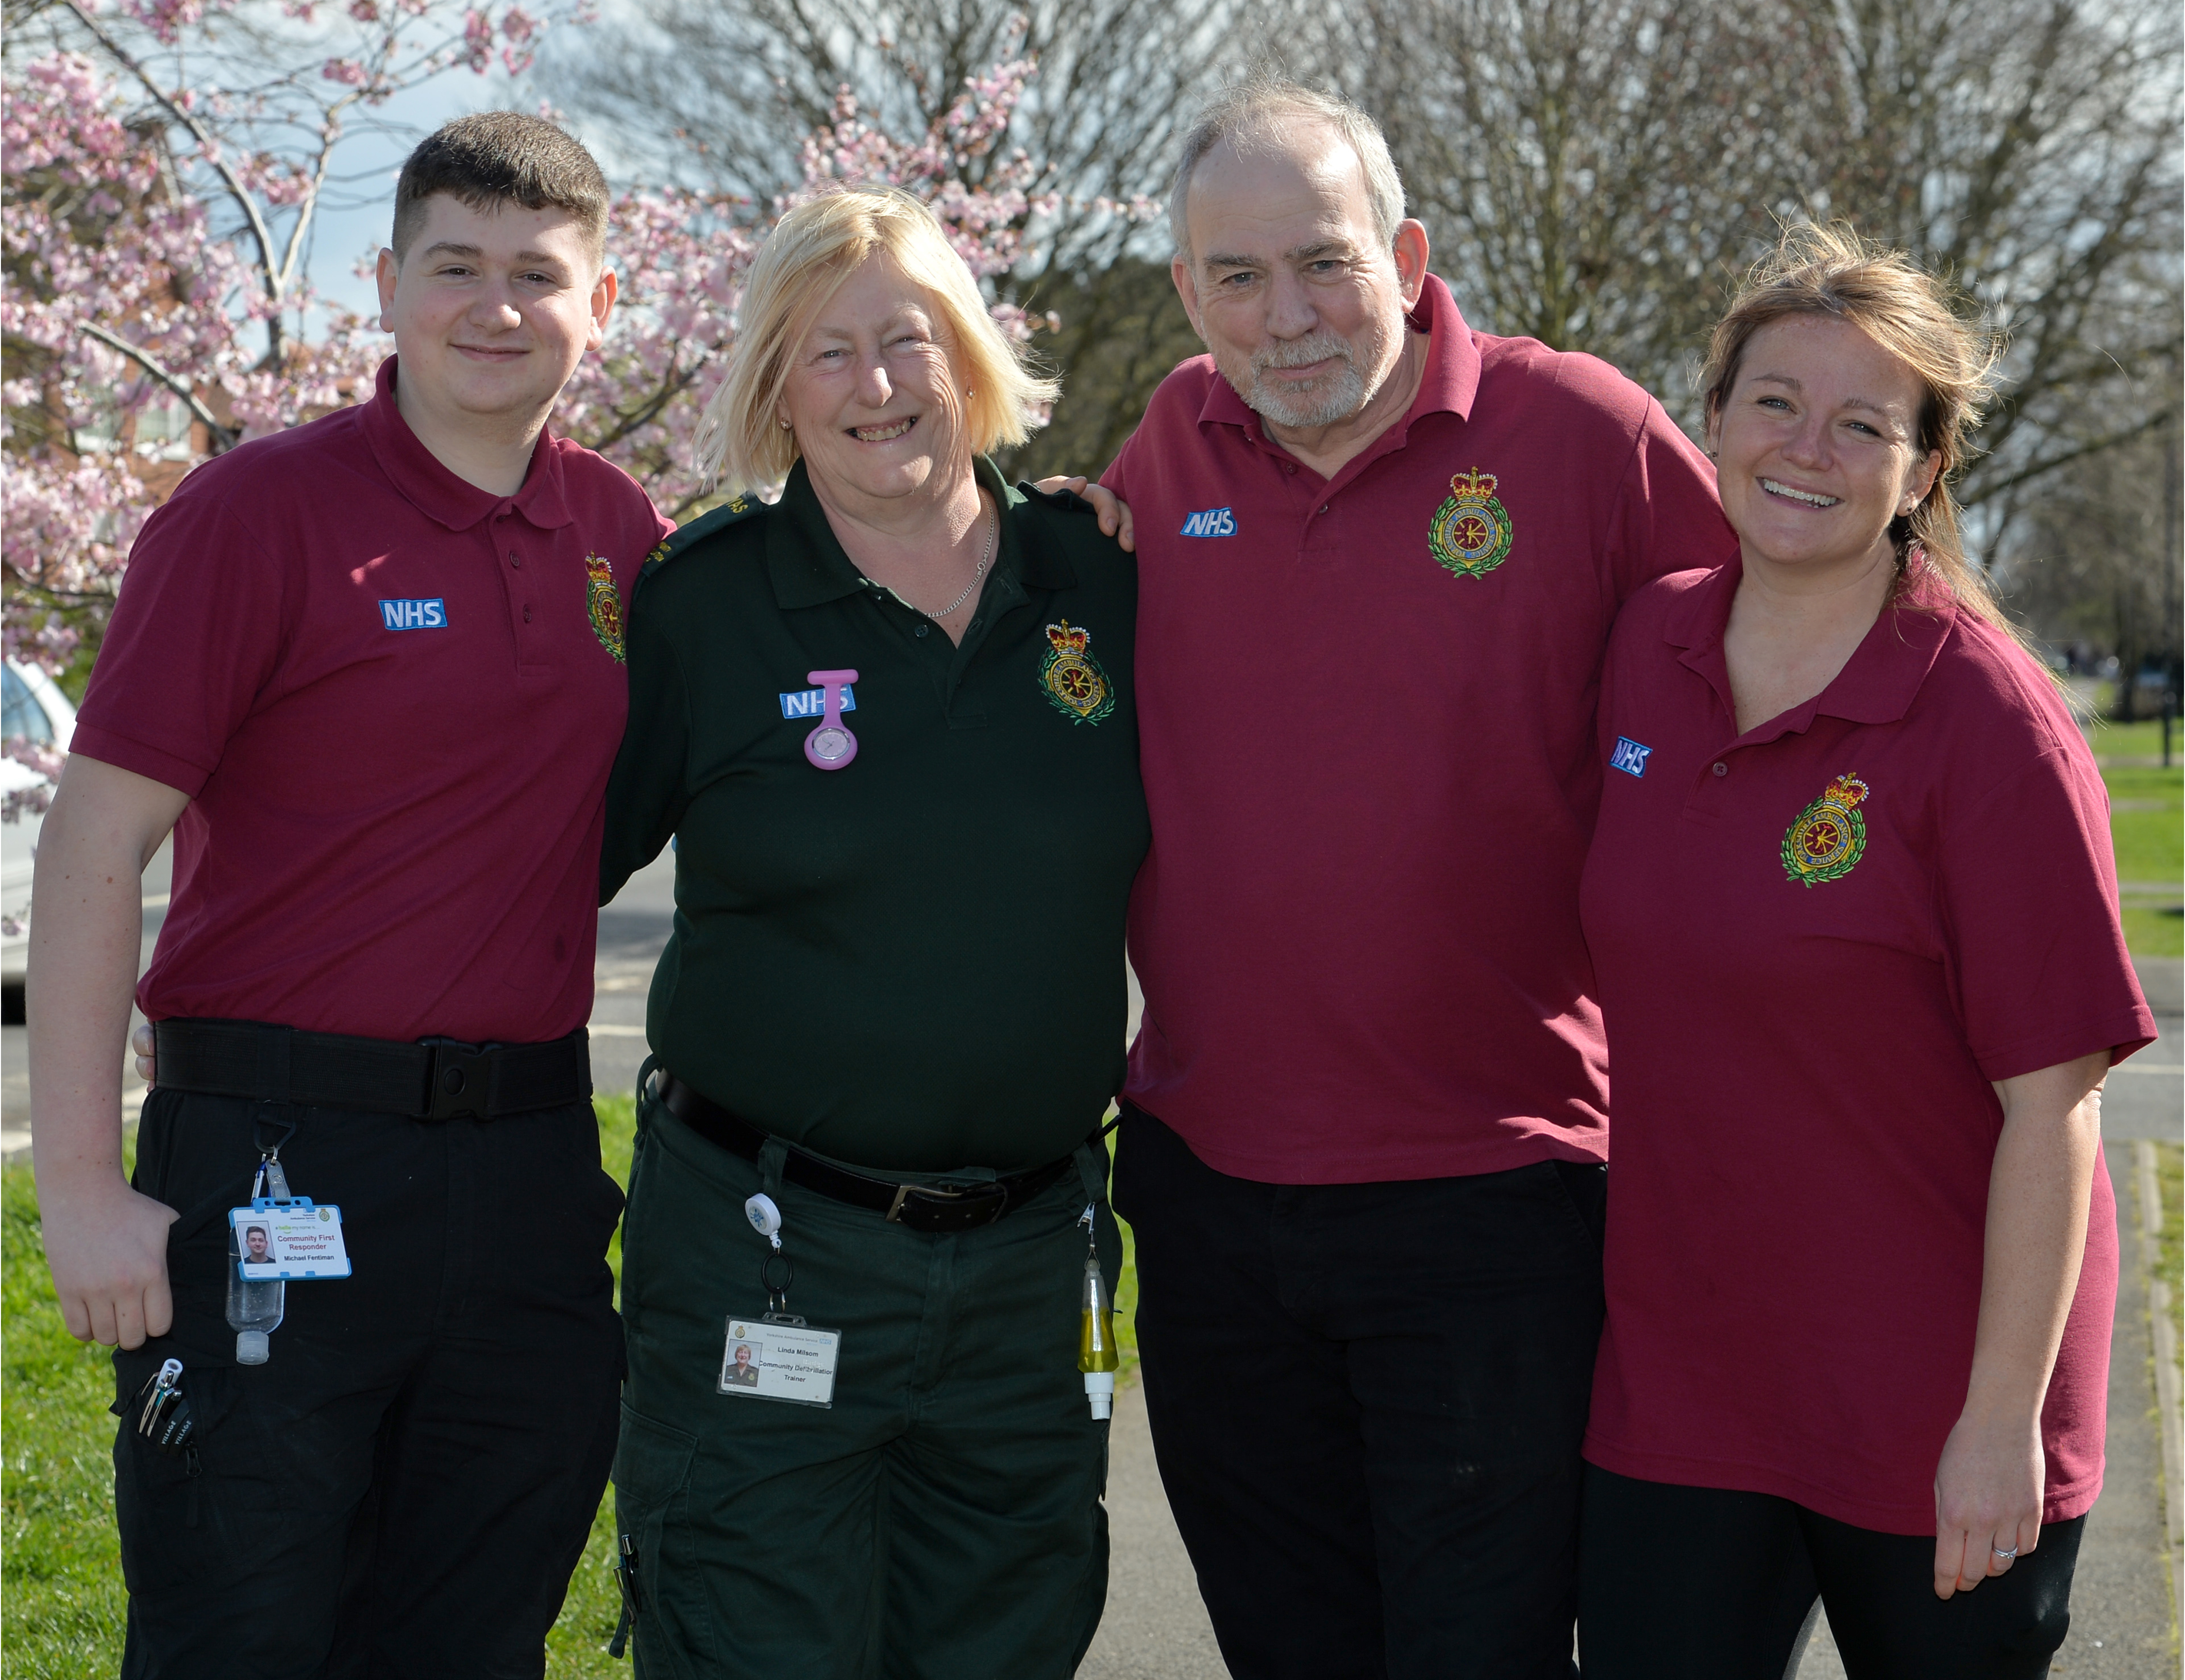 Three Community First Responders, in uniform, and a YAS member of staff